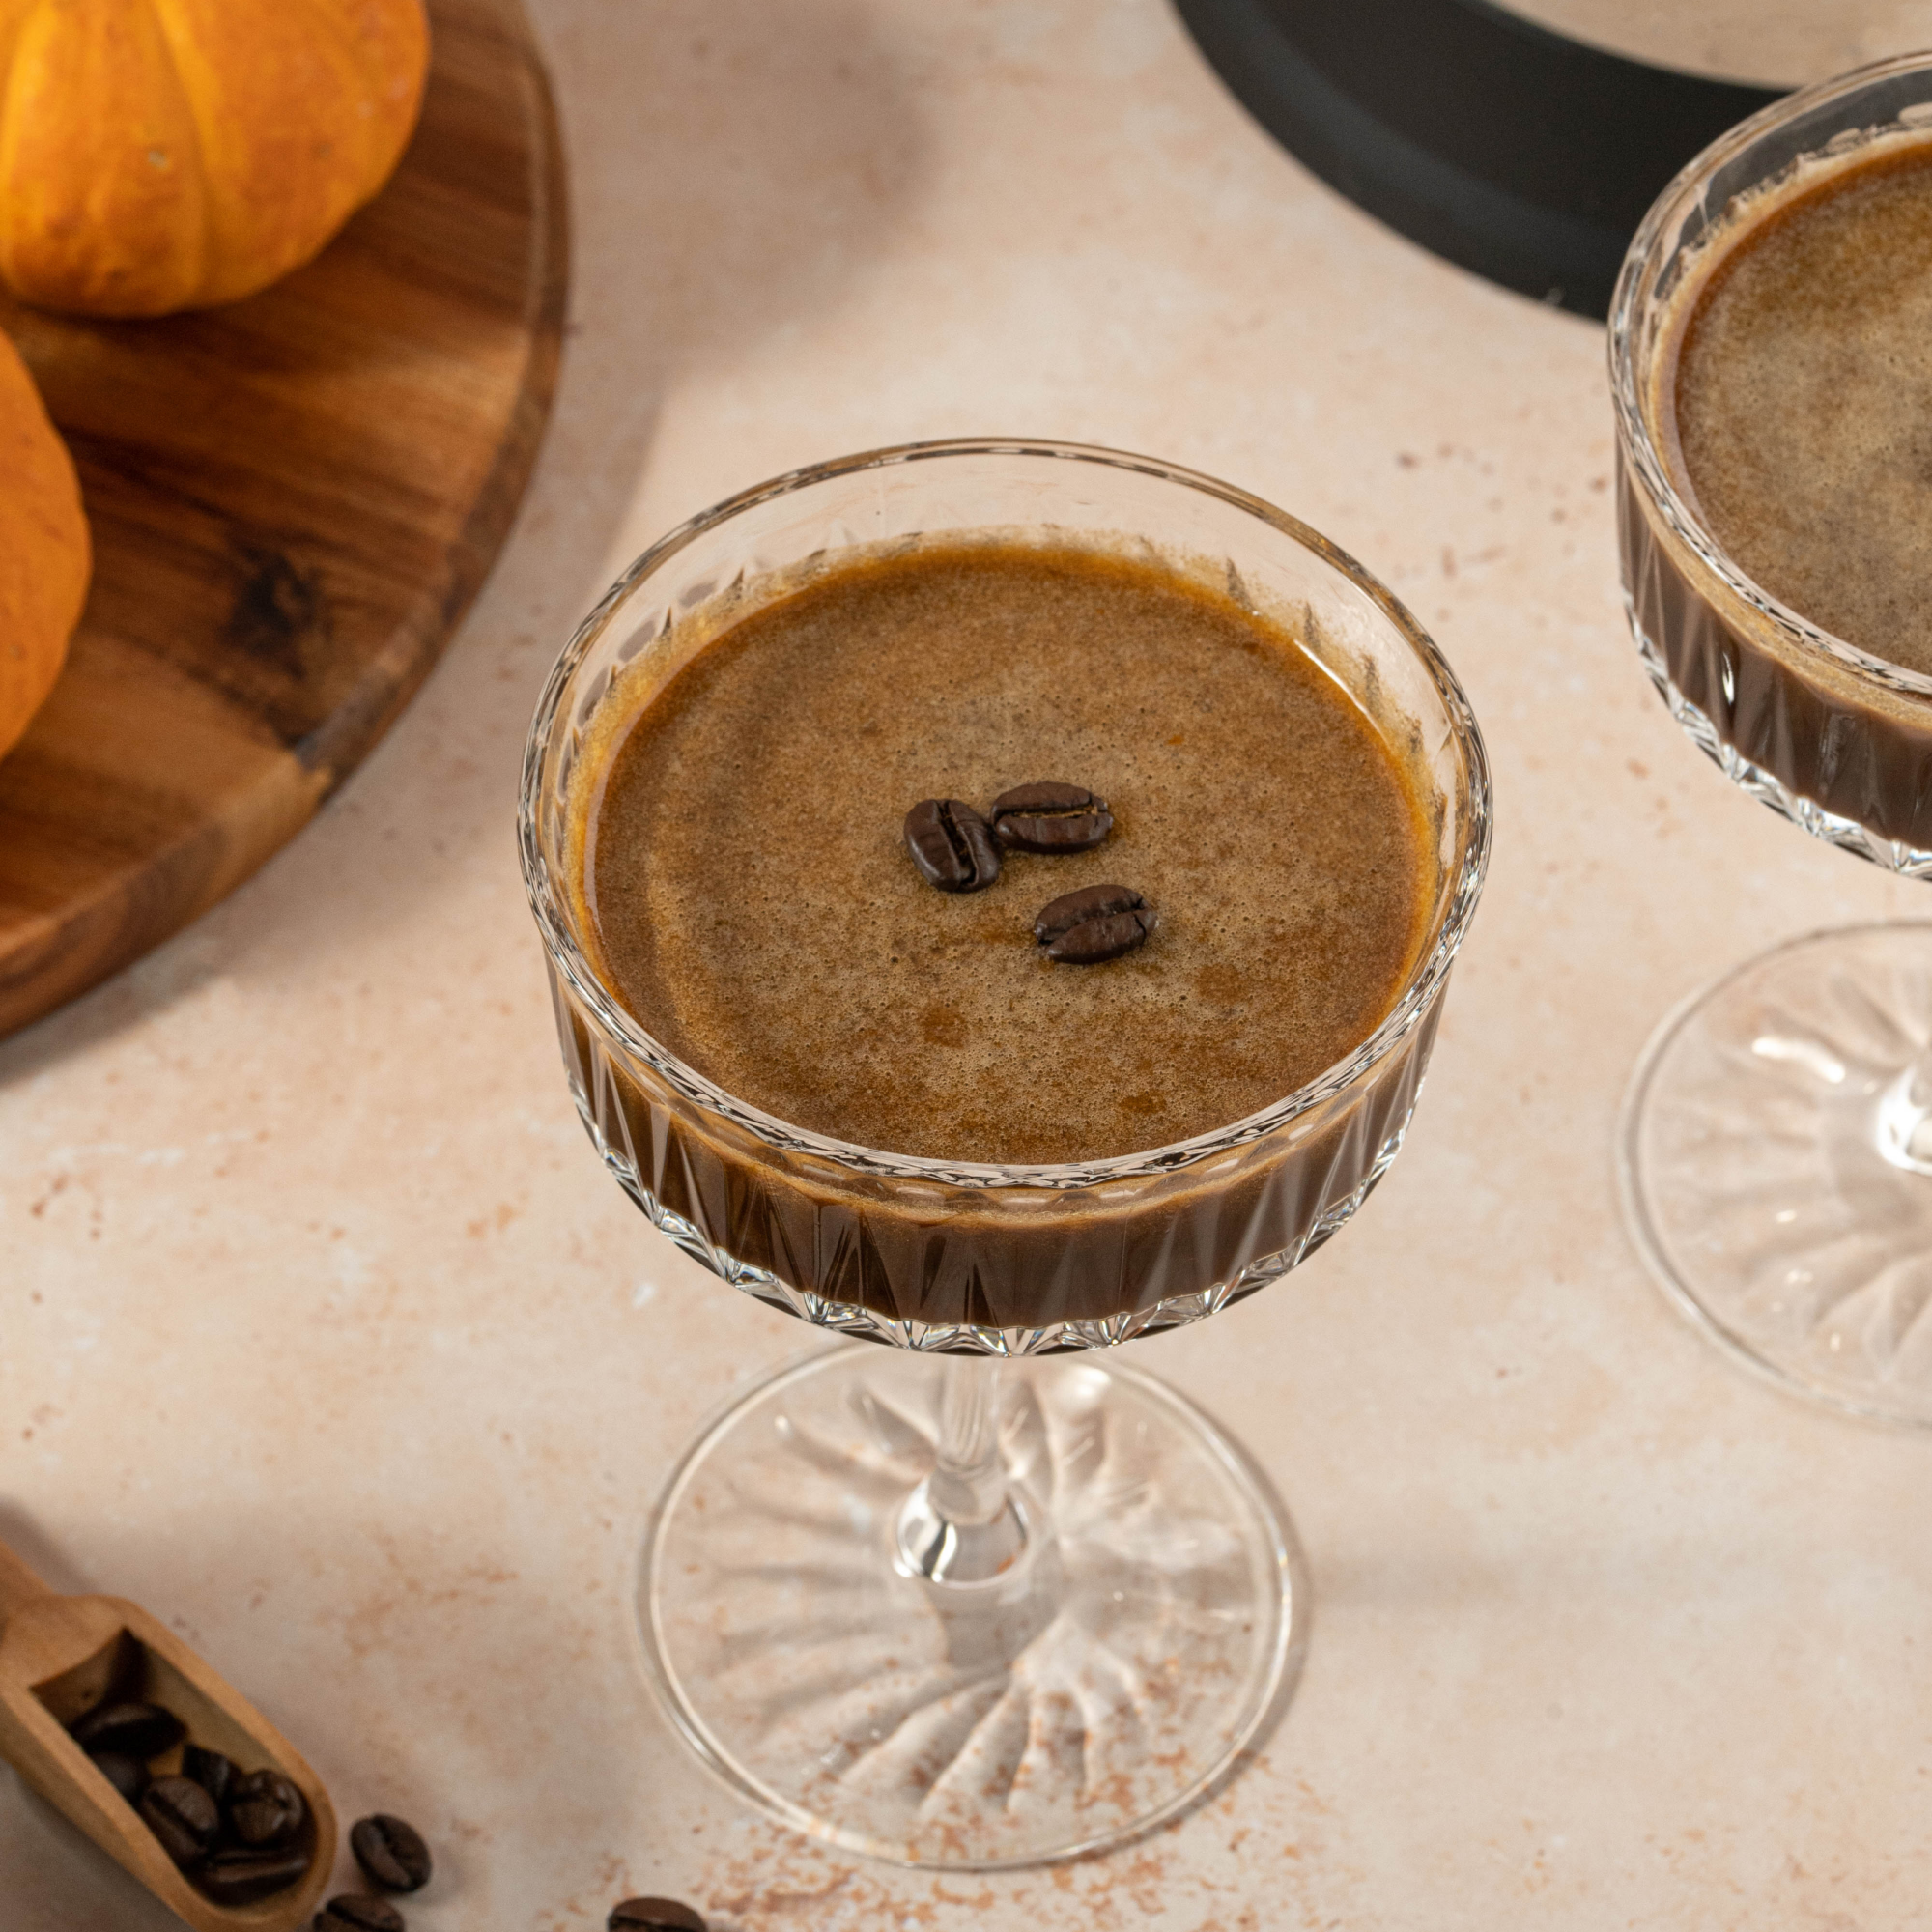 Pumpkin Spiced Espresso Martini in a glass, crafted with the Almond Cow machine